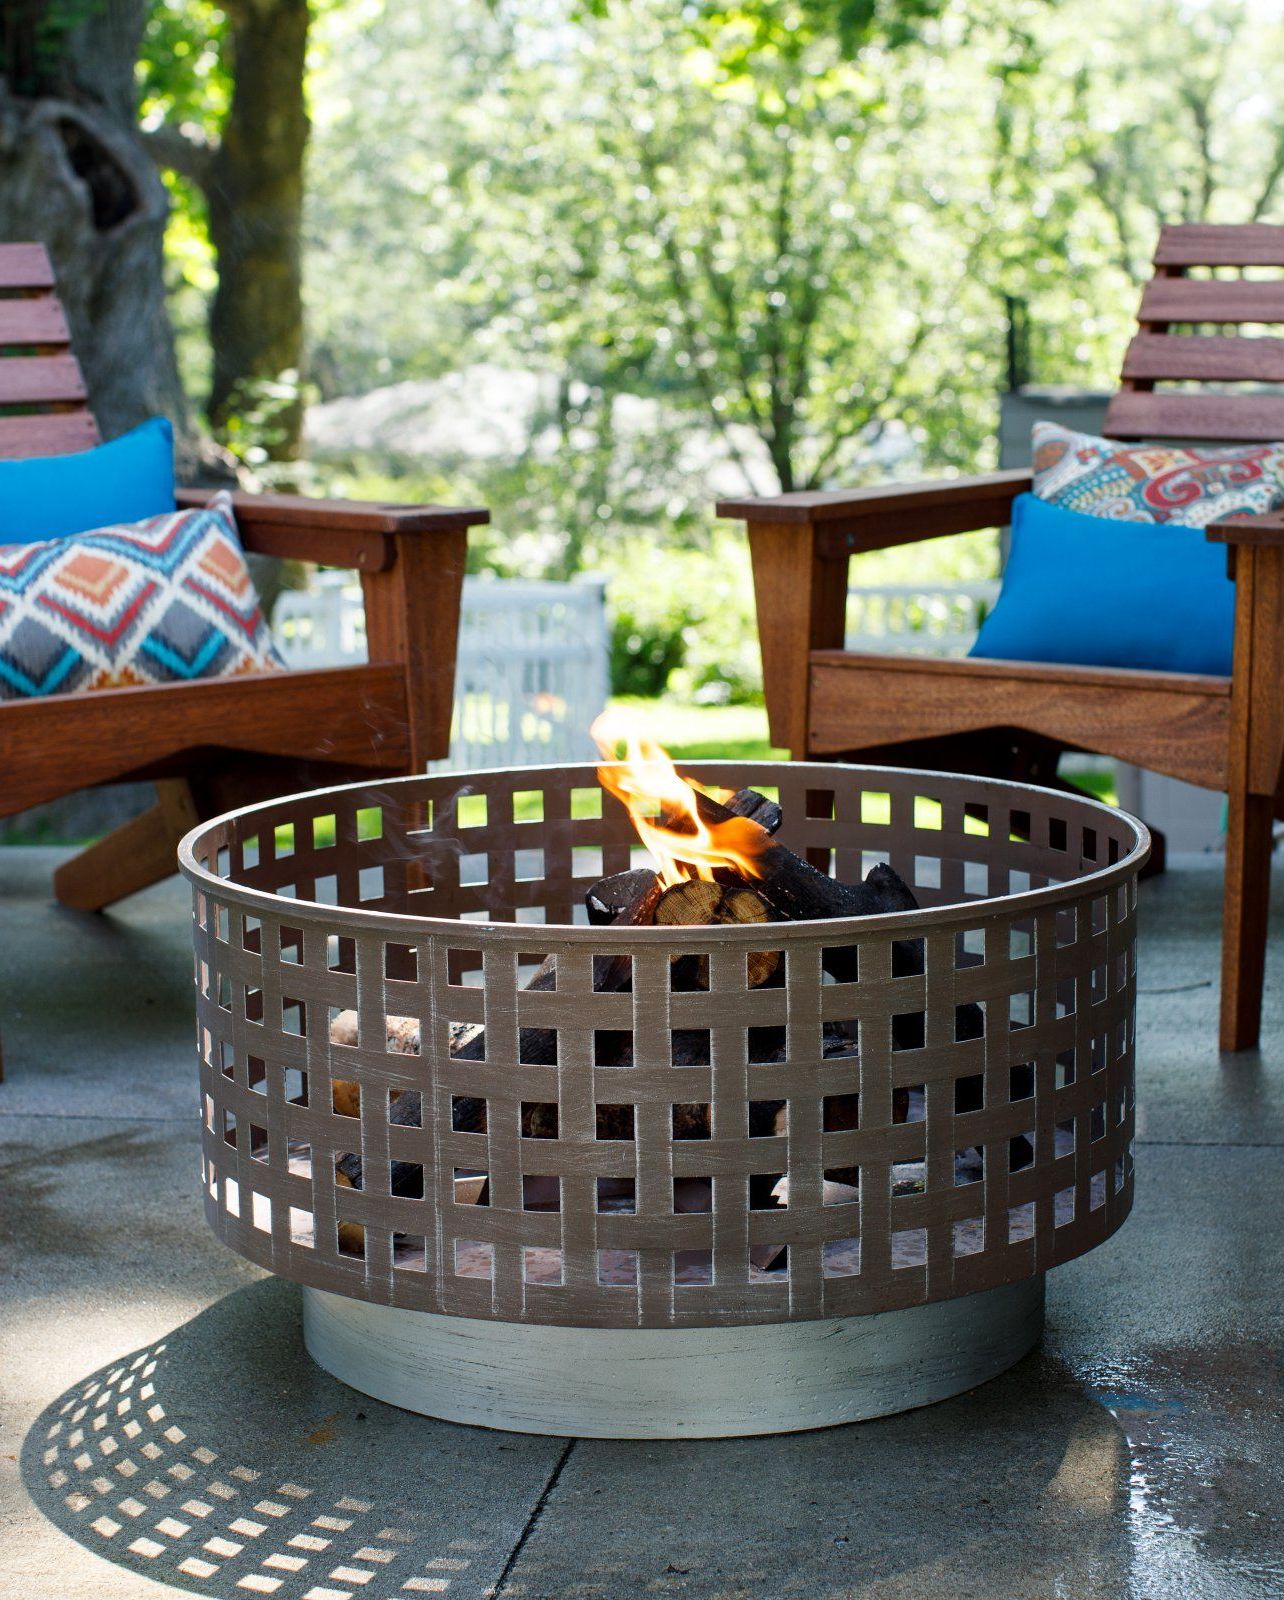 12 Of The Most Stylish Fire Pits You Can Buy Online At Every Budget